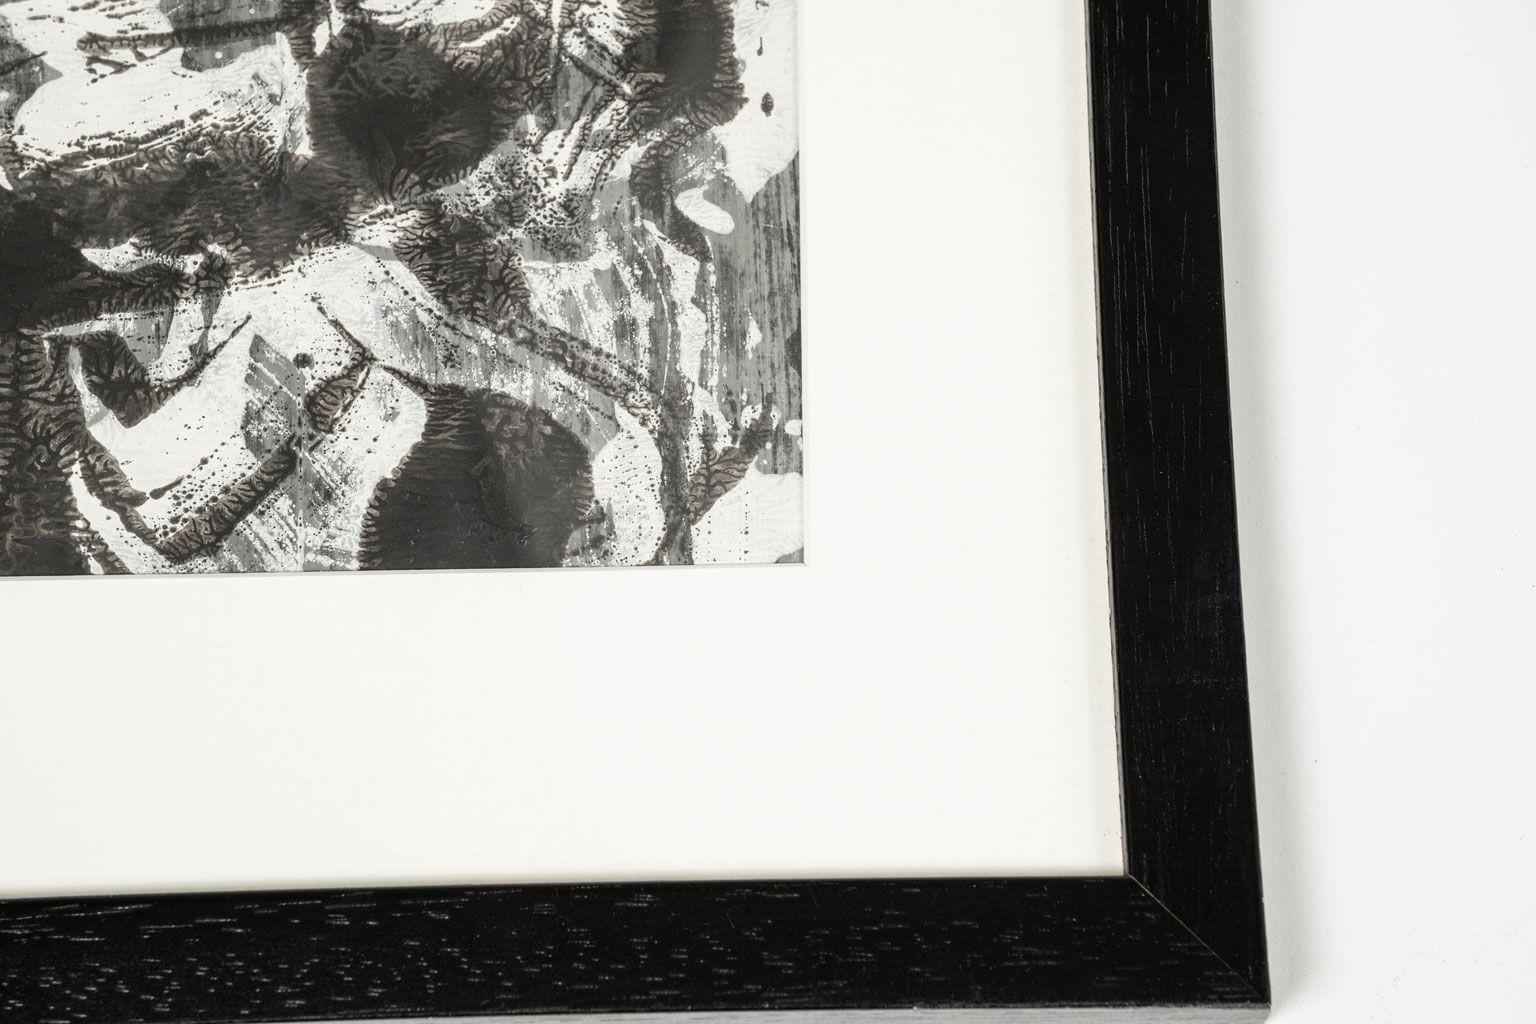 Mid-century framed abstract drip-style acrylic painting. Framed in black metal under glass. Unsigned. Four drip-style paintings are available (see last picture) and sold separately, priced $1,400 each.